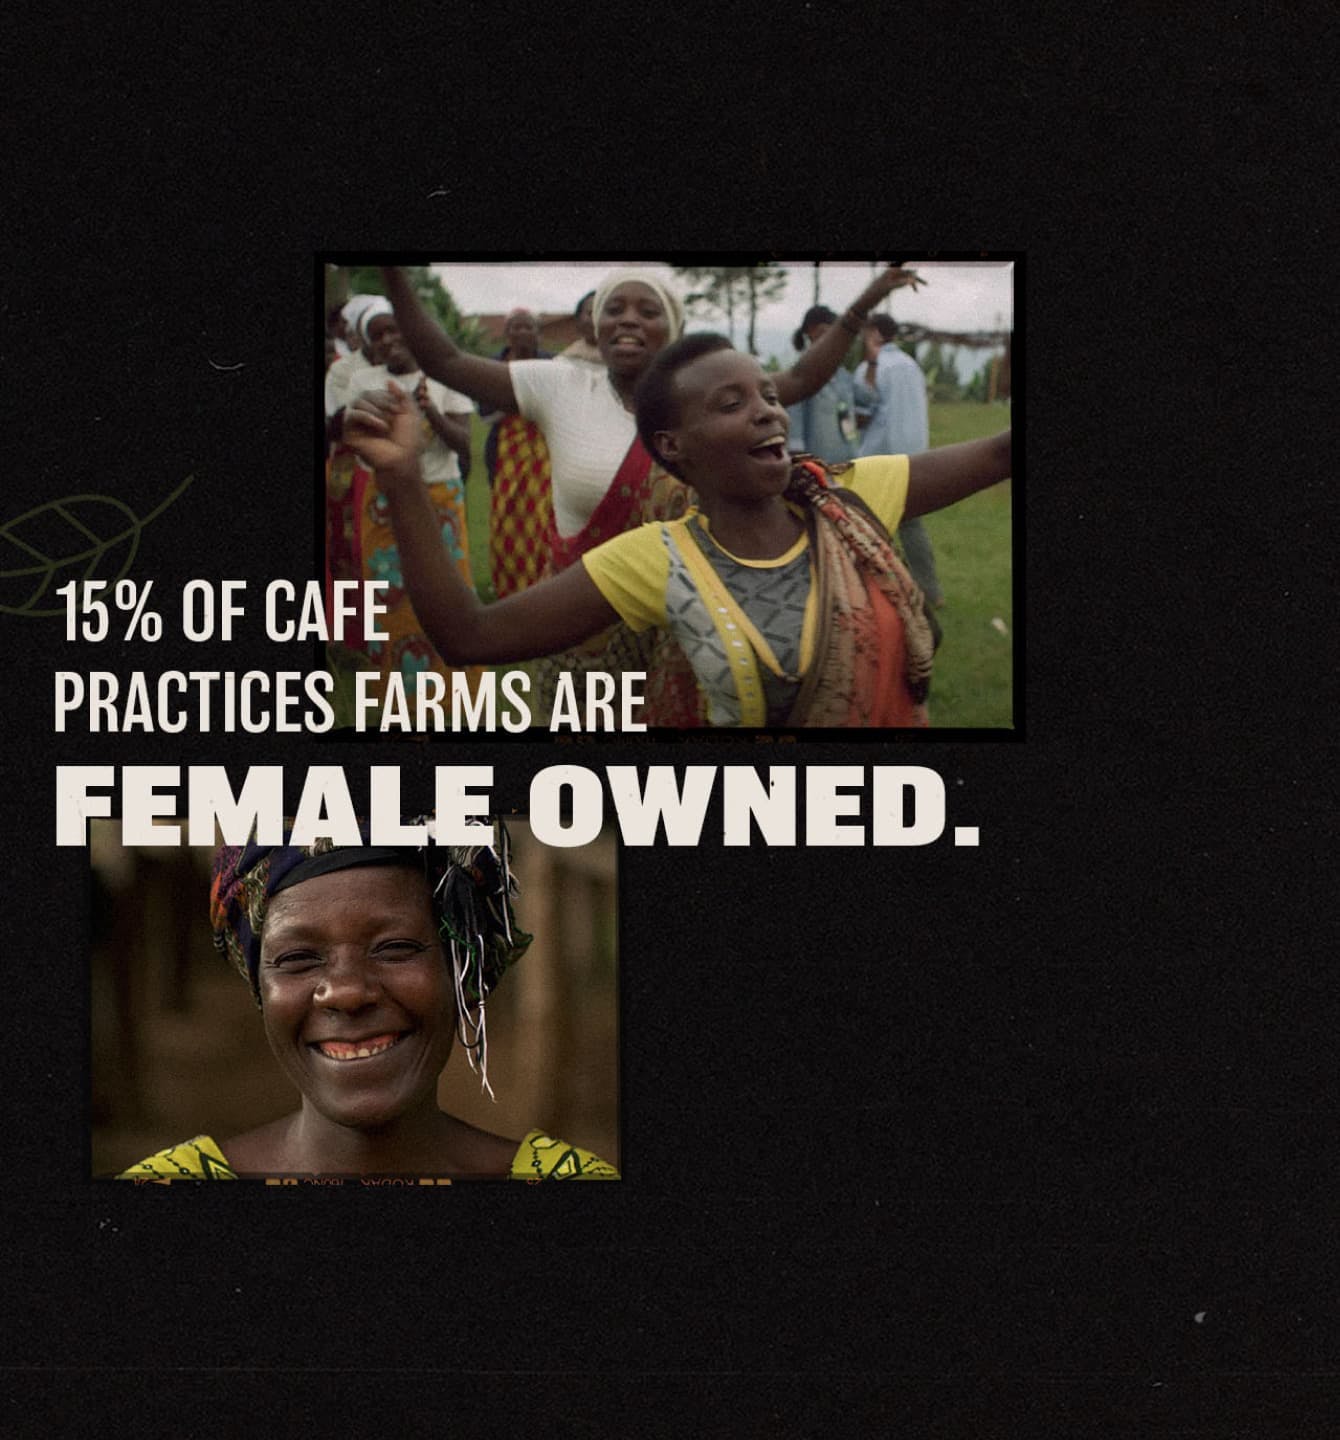 starbucks origins 15% of cafe practices farms are female owned.